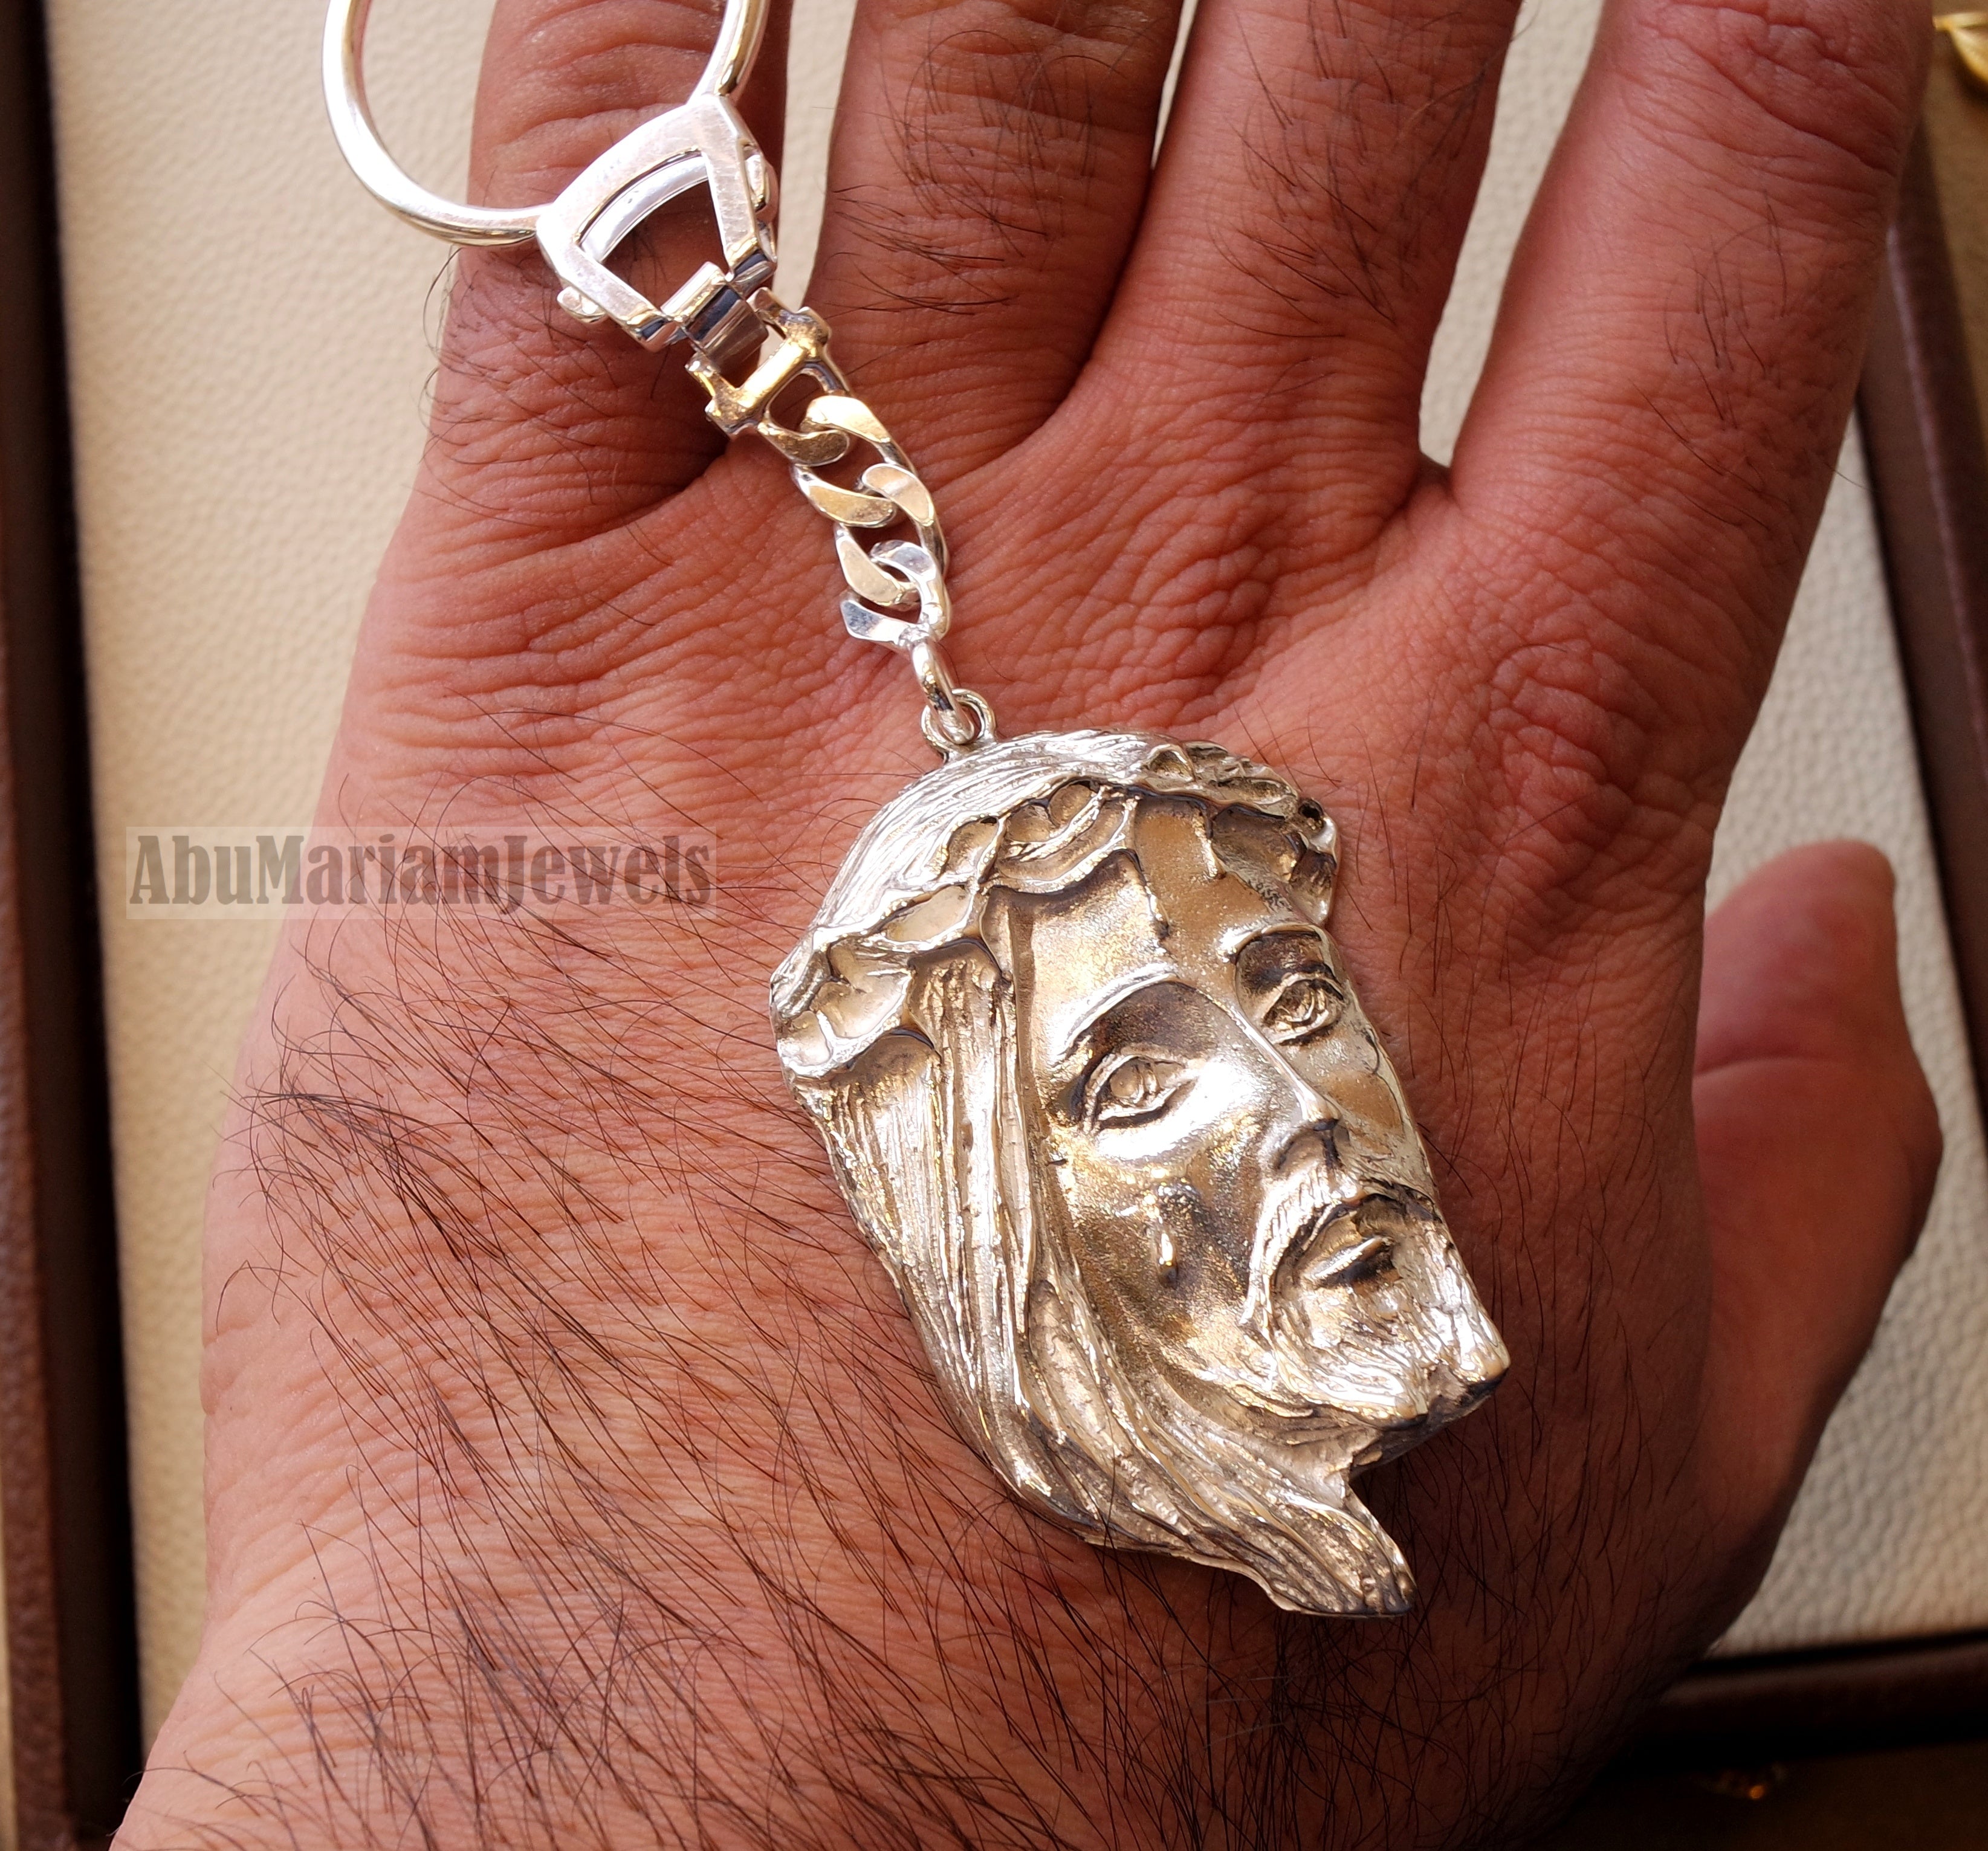 Jesus Christ face head huge pendant keychain sterling silver 925 jewelry christianity vintage handmade heavy man gift fast shipping